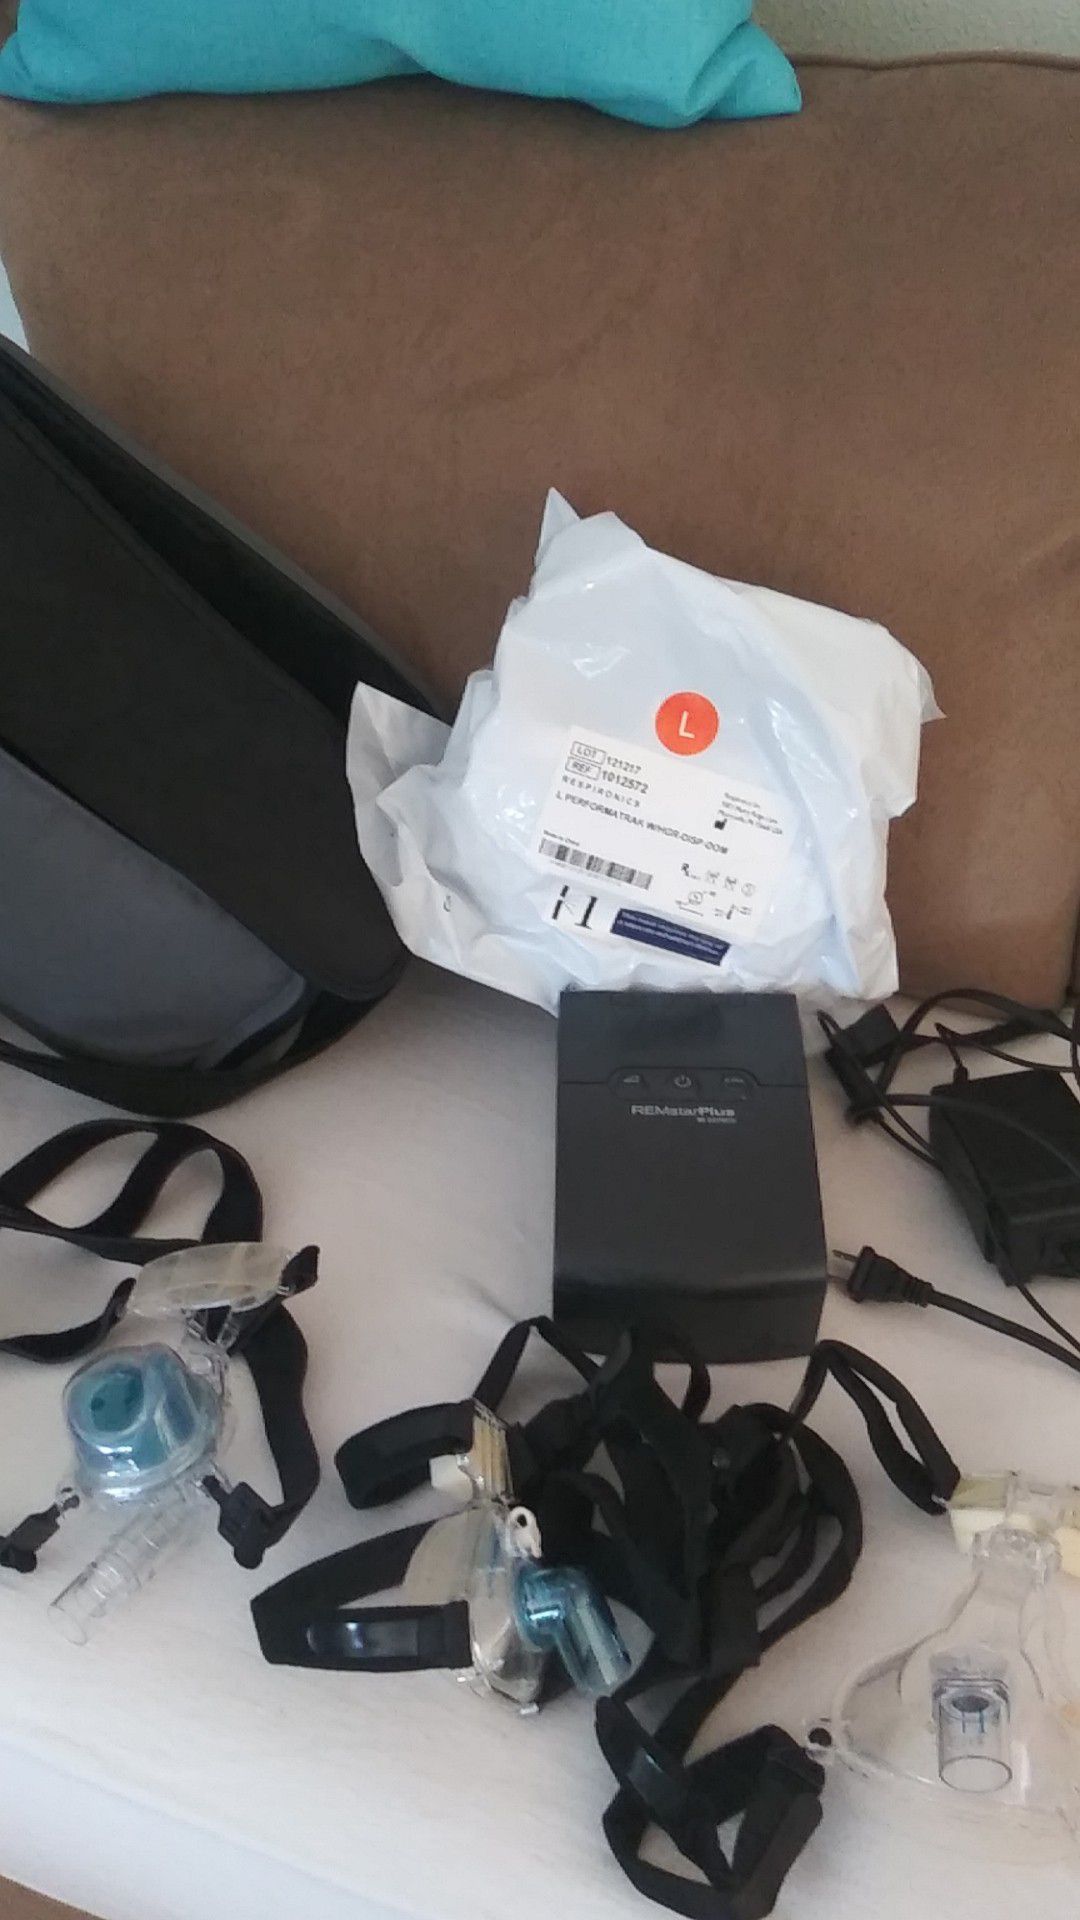 REMstar Plus CPAP machine with accessories.